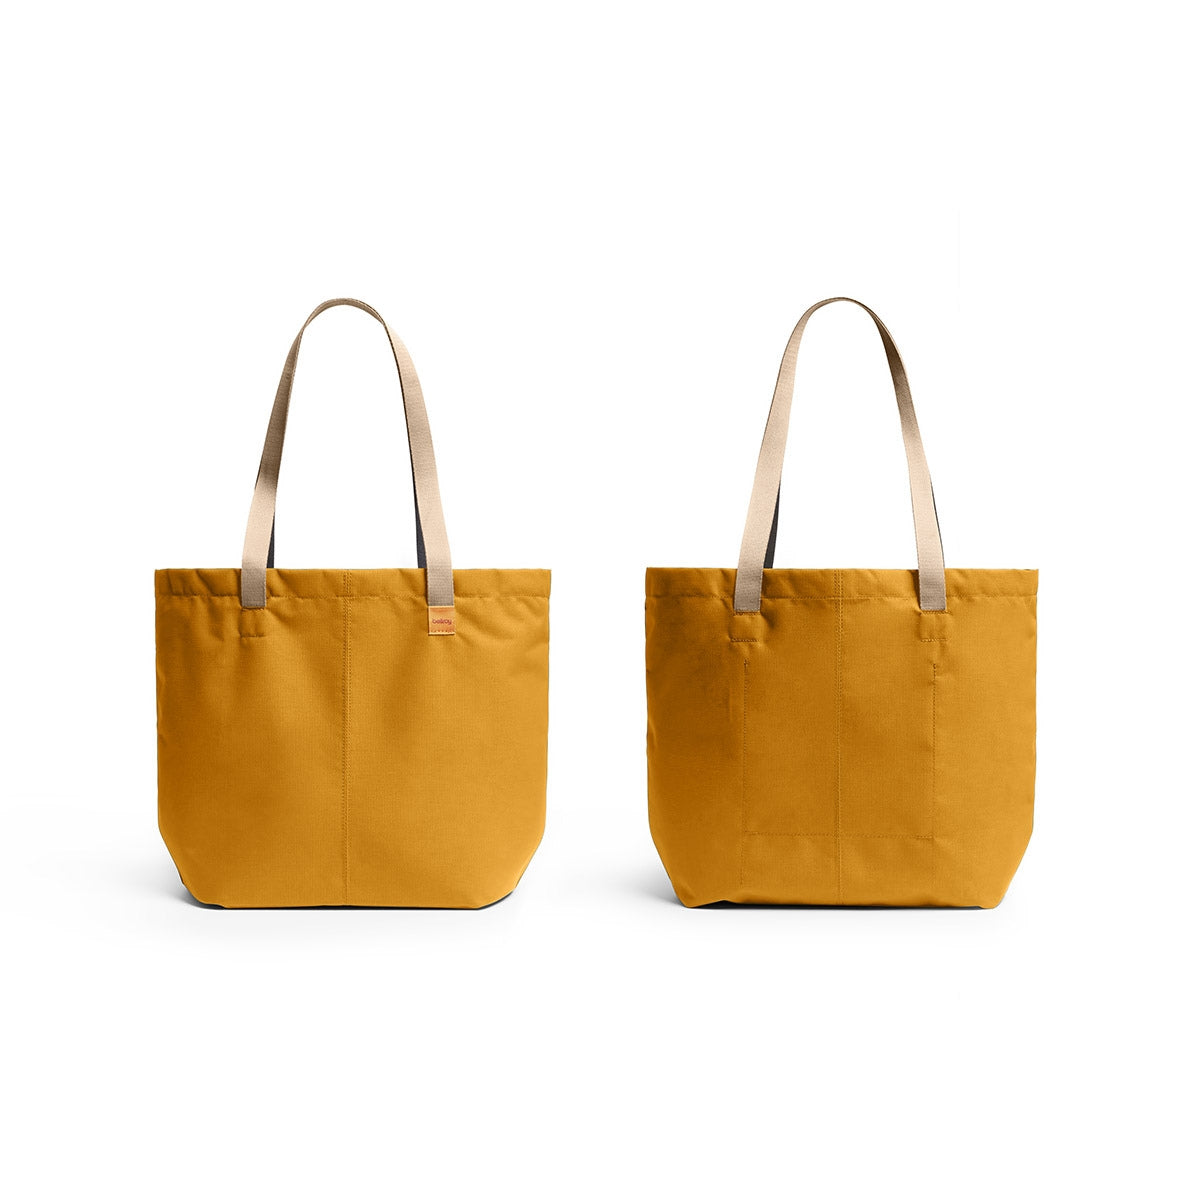 Bellroy Market Tote in Copper